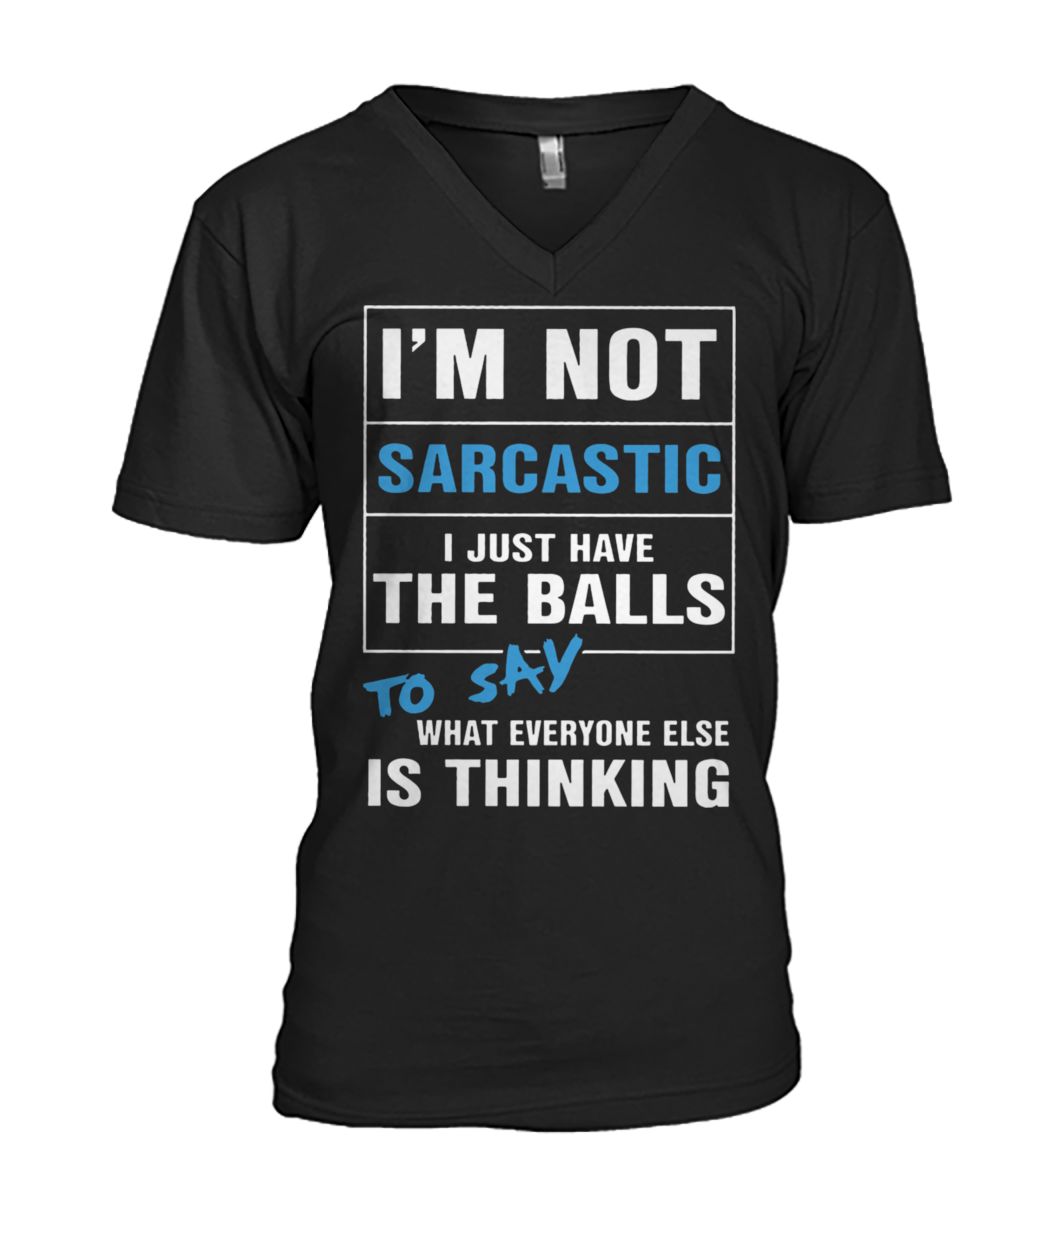 I’m not sarcastic I just have the balls to say what everyone else is thinking mens v-neck